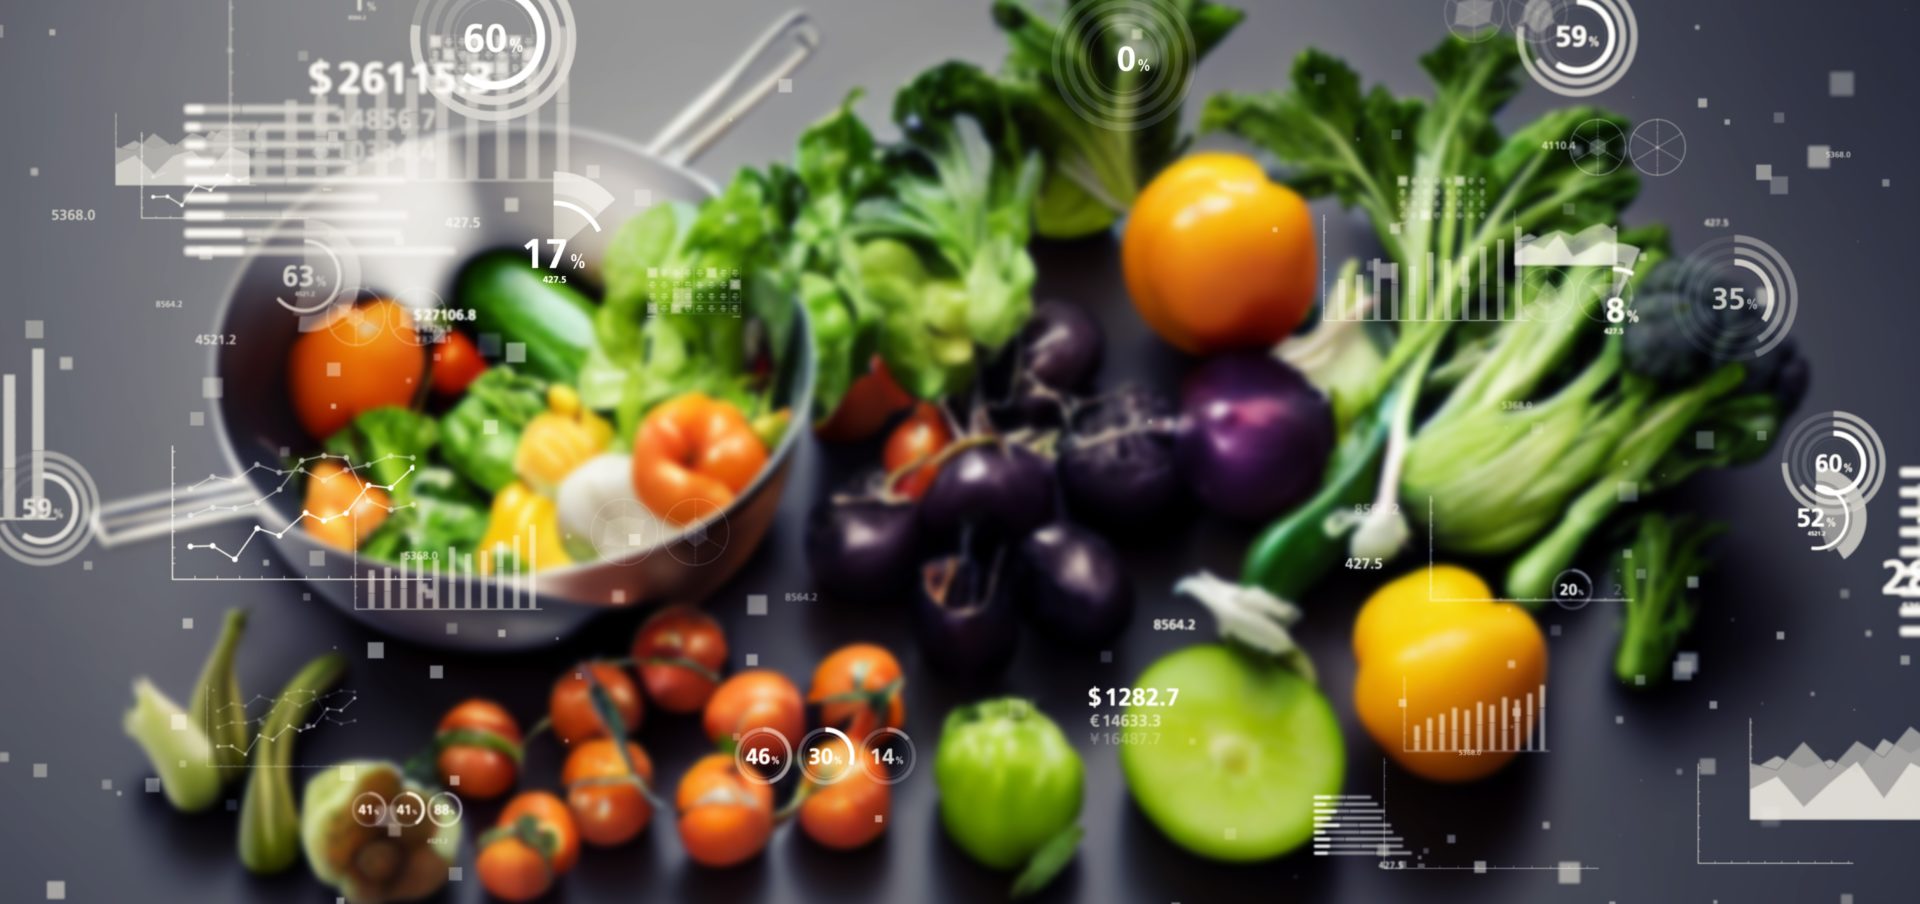 Apeel Sciences Launches New Imaging and Data Services to Reduce Food Waste and Increase Value Across the Produce Supply Chain